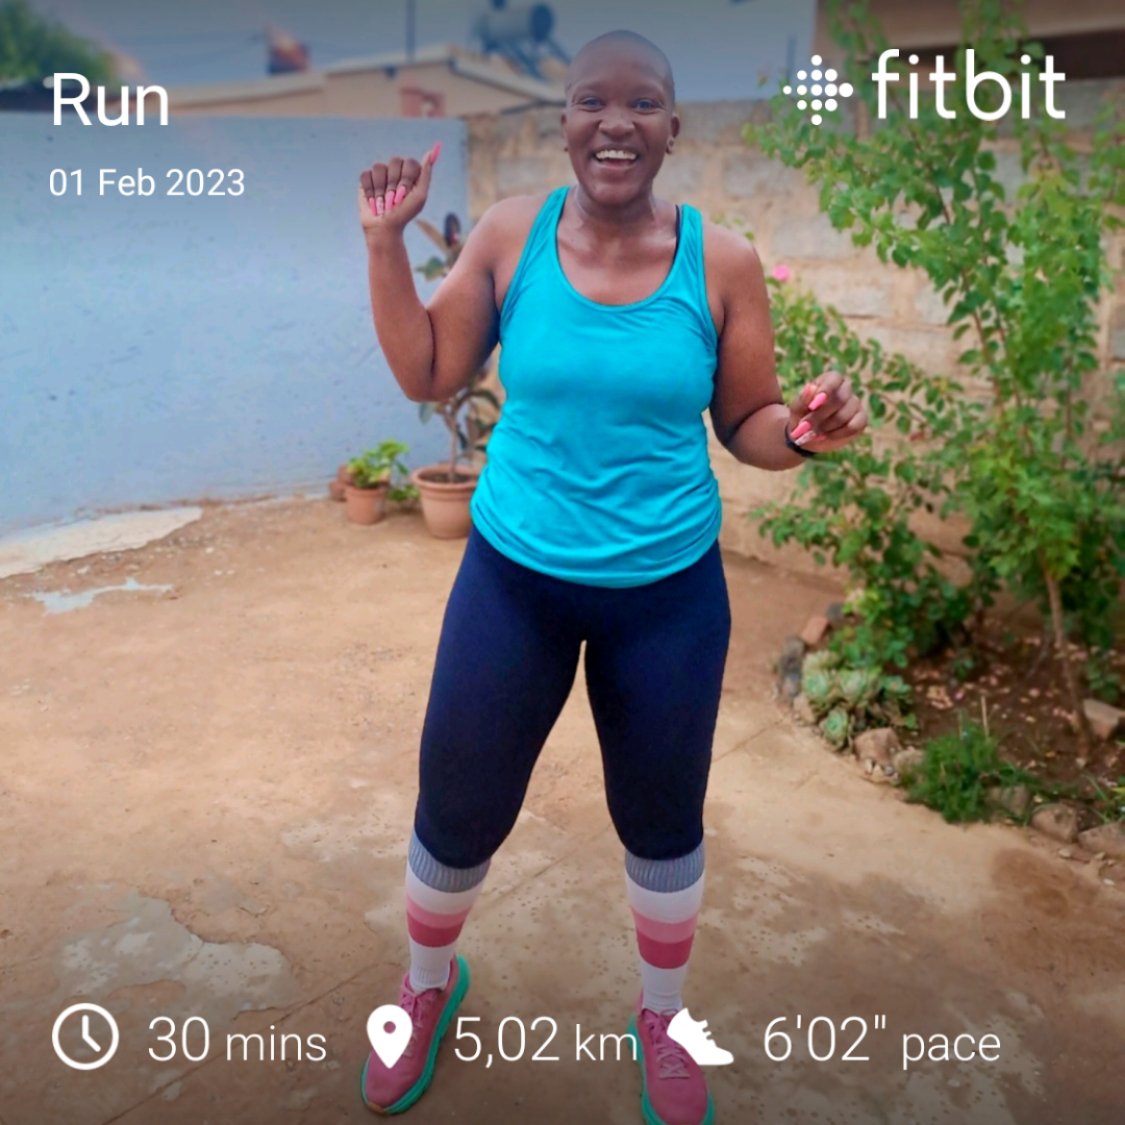 Hello Chapter 2 of 2023 🤩
We still showing up 🤸‍♀️
Official February account opened!
#RunningWithTumiSole #RunningWithSoleAC #UntilWeRunAgain #TrapnLos #FetchYourBody2023 #90dayswithoutsugar #IPaintedMyRun #IChoose2Bactive